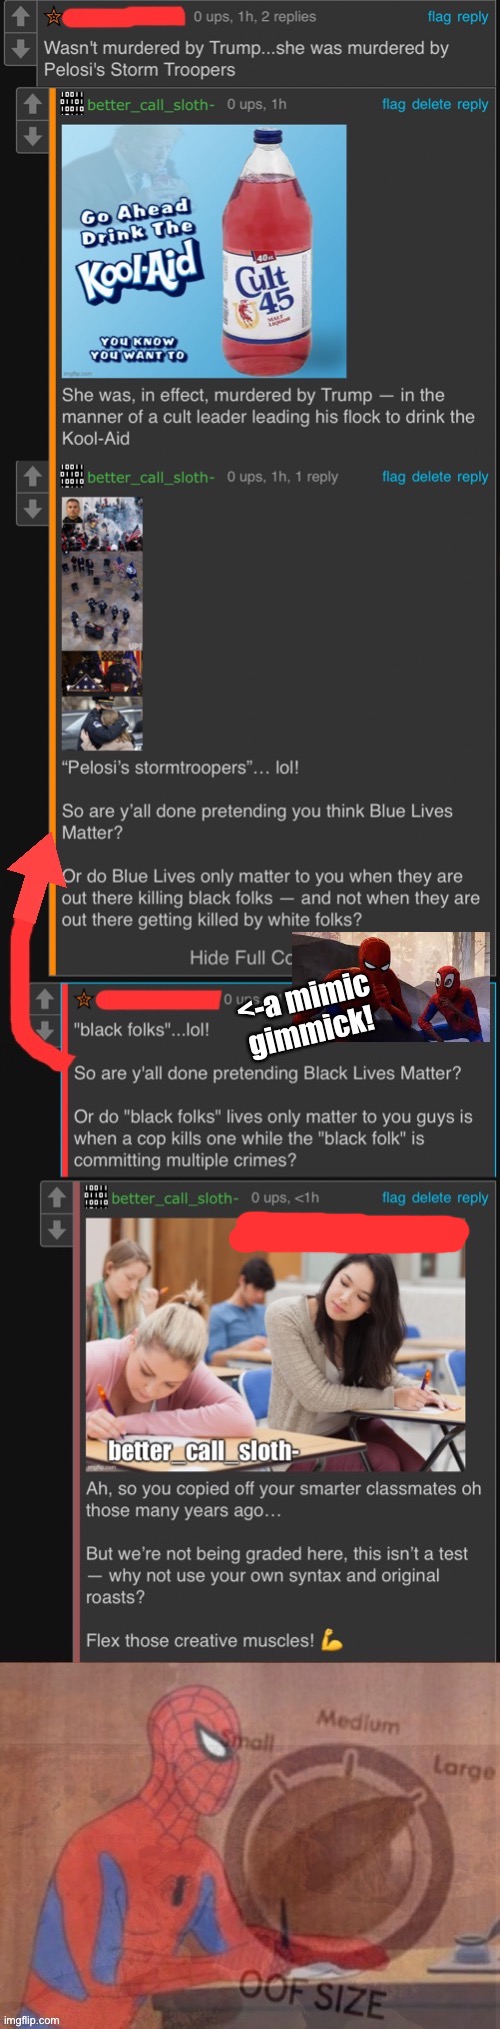 Spider Writer’s block | image tagged in spiderman,trolls,internet trolls,writer,comment section,it came from the comments | made w/ Imgflip meme maker